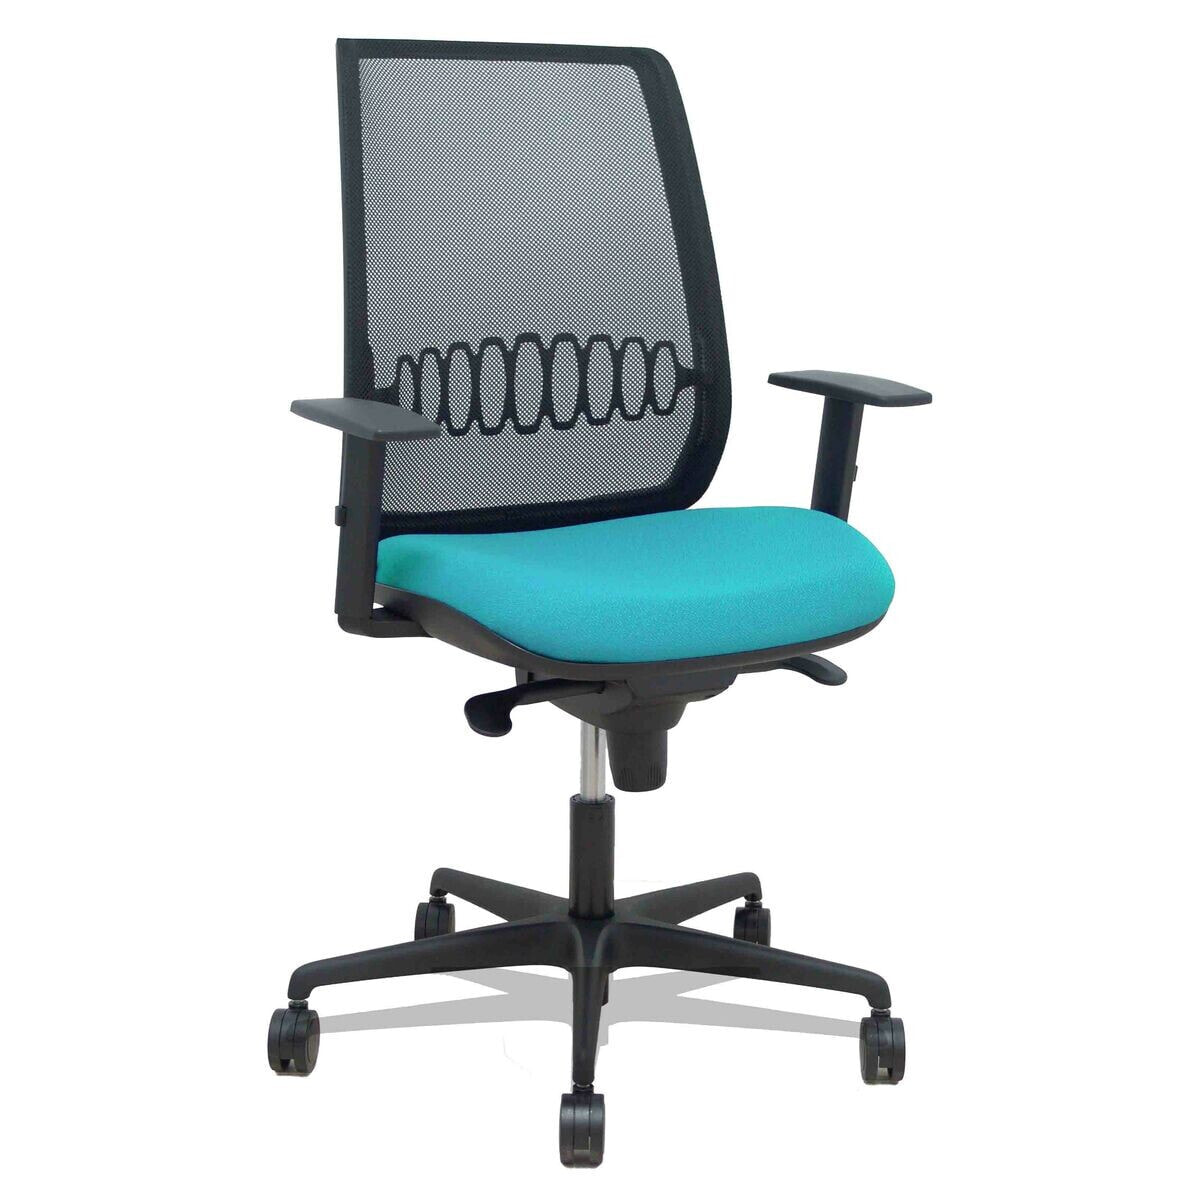 Office Chair Alares P&C 0B68R65 Turquoise